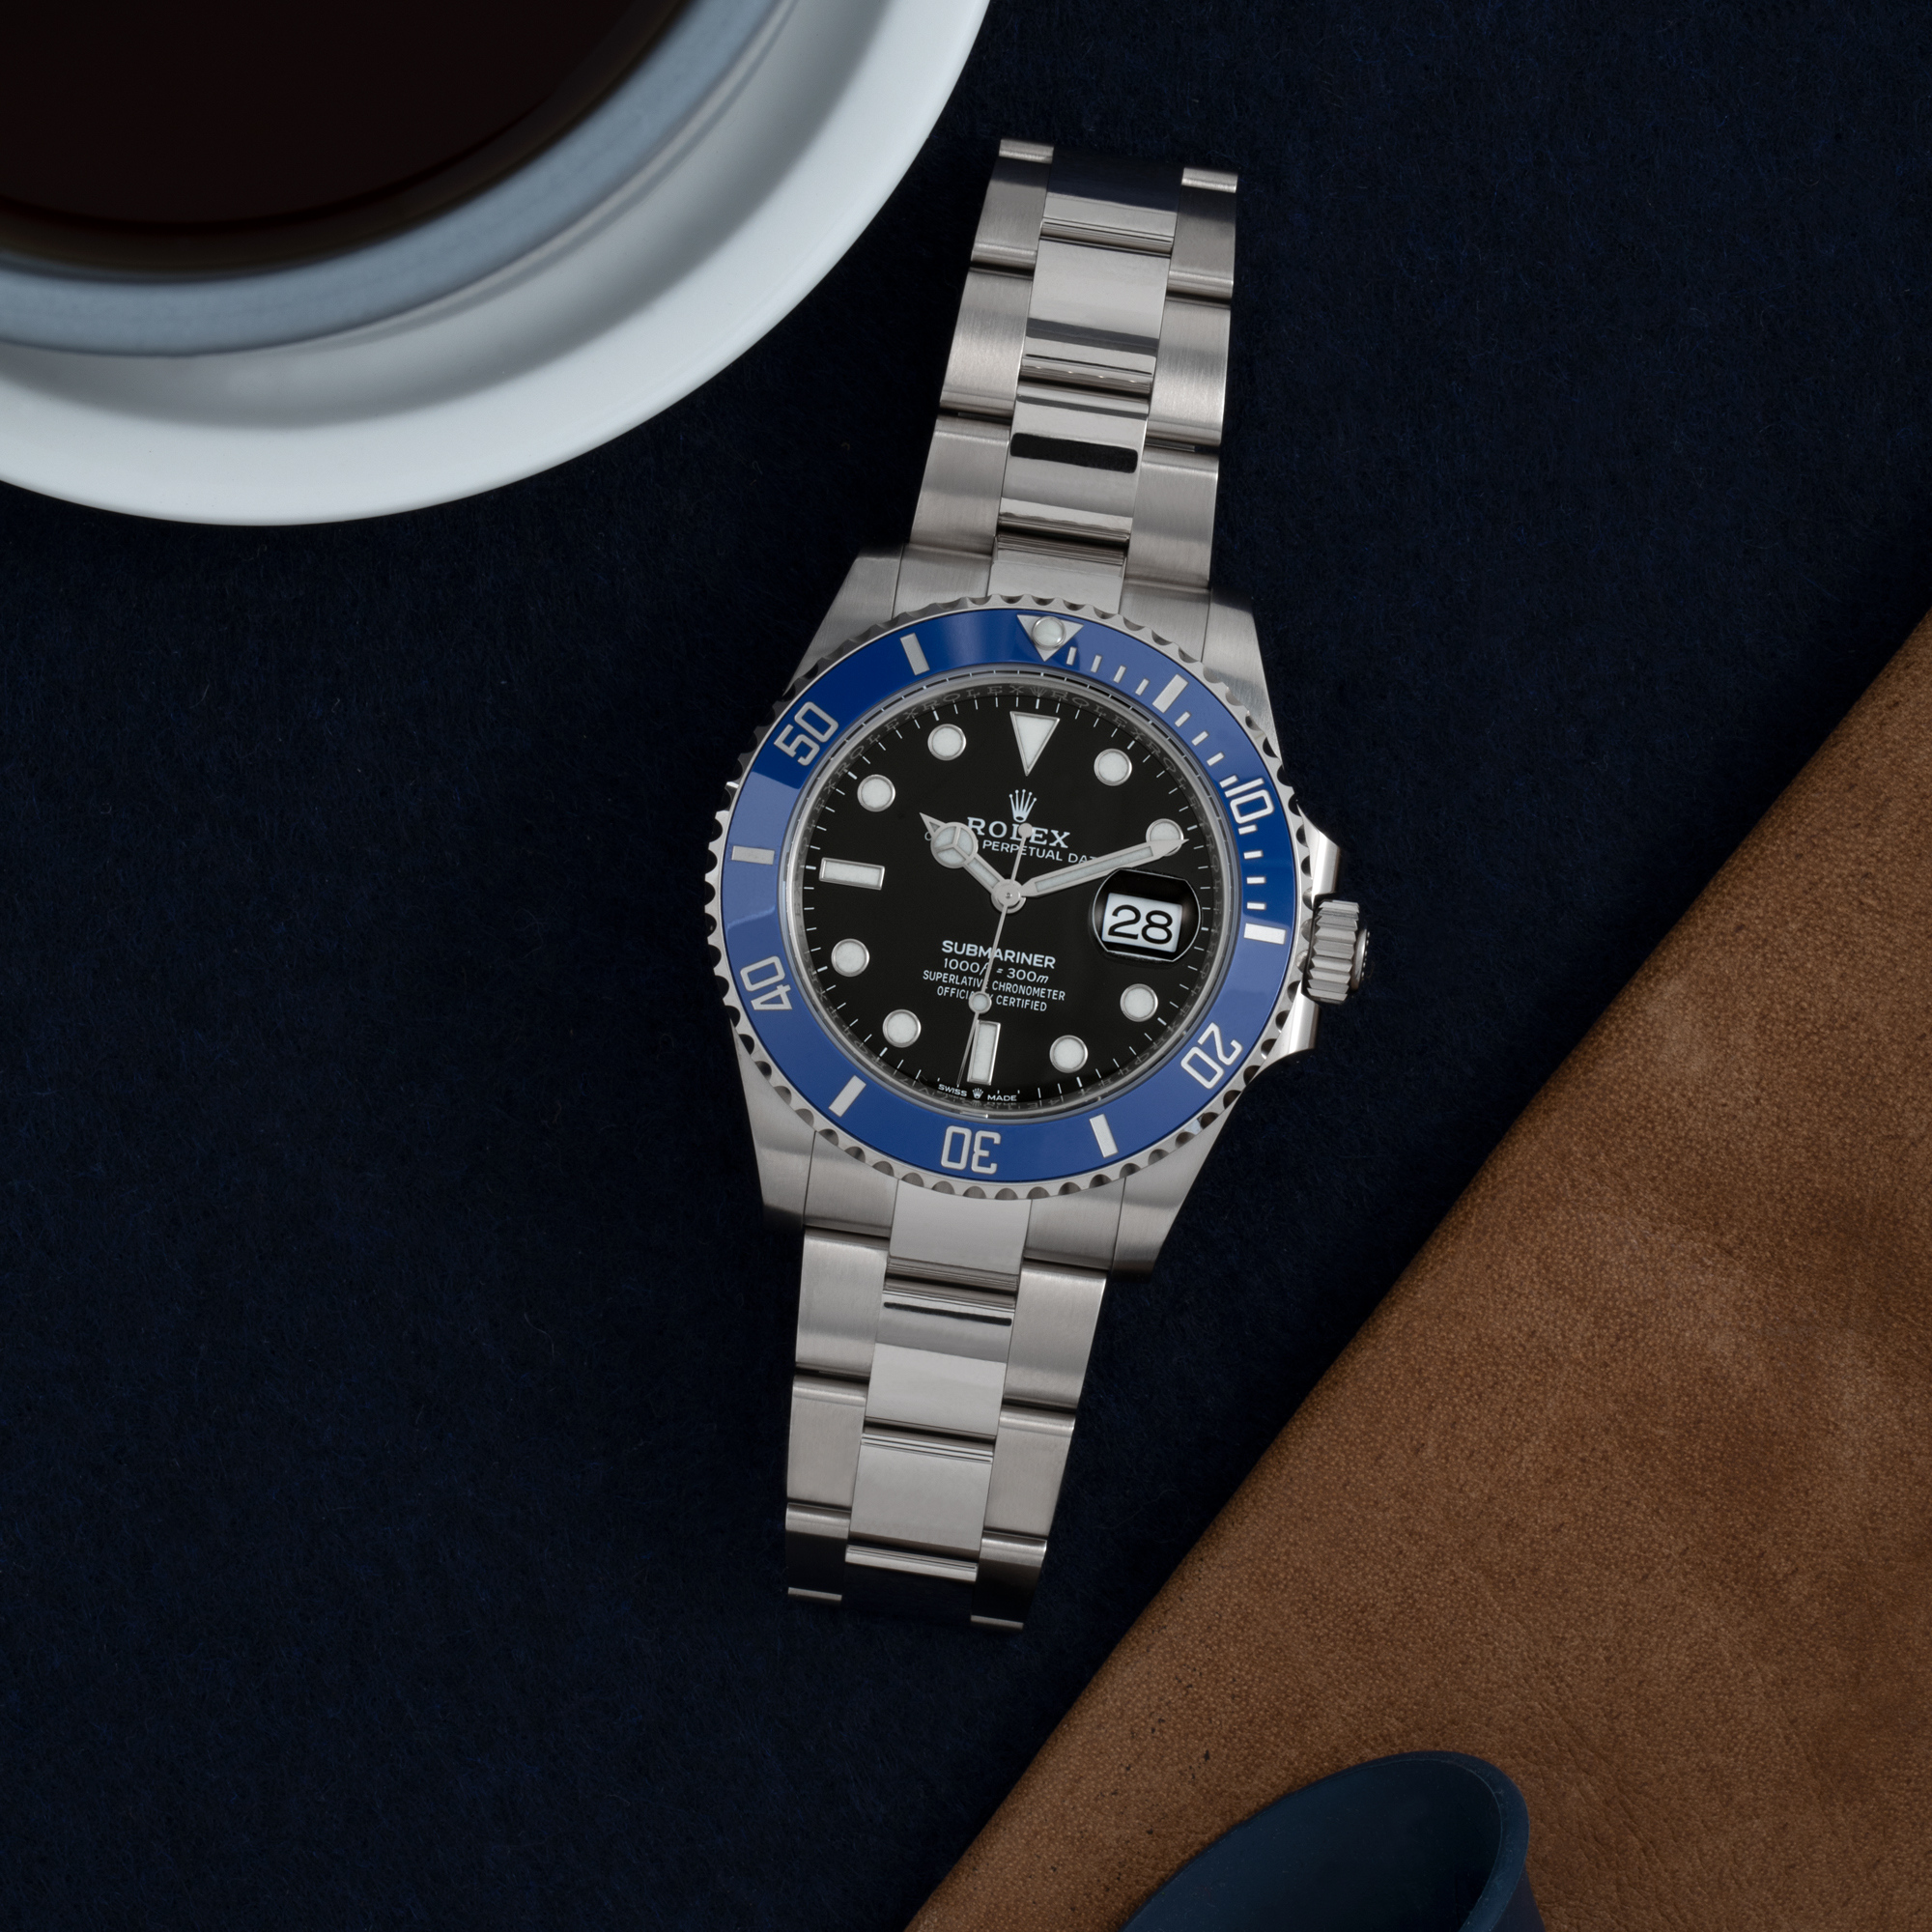 sendt aflivning pølse Hodinkee on Twitter: "The @rolex Submariner Date in white gold now has a  black dial that makes it one heck of a low-key luxury sport watch. @jonbues  goes Hands-On with the 2020